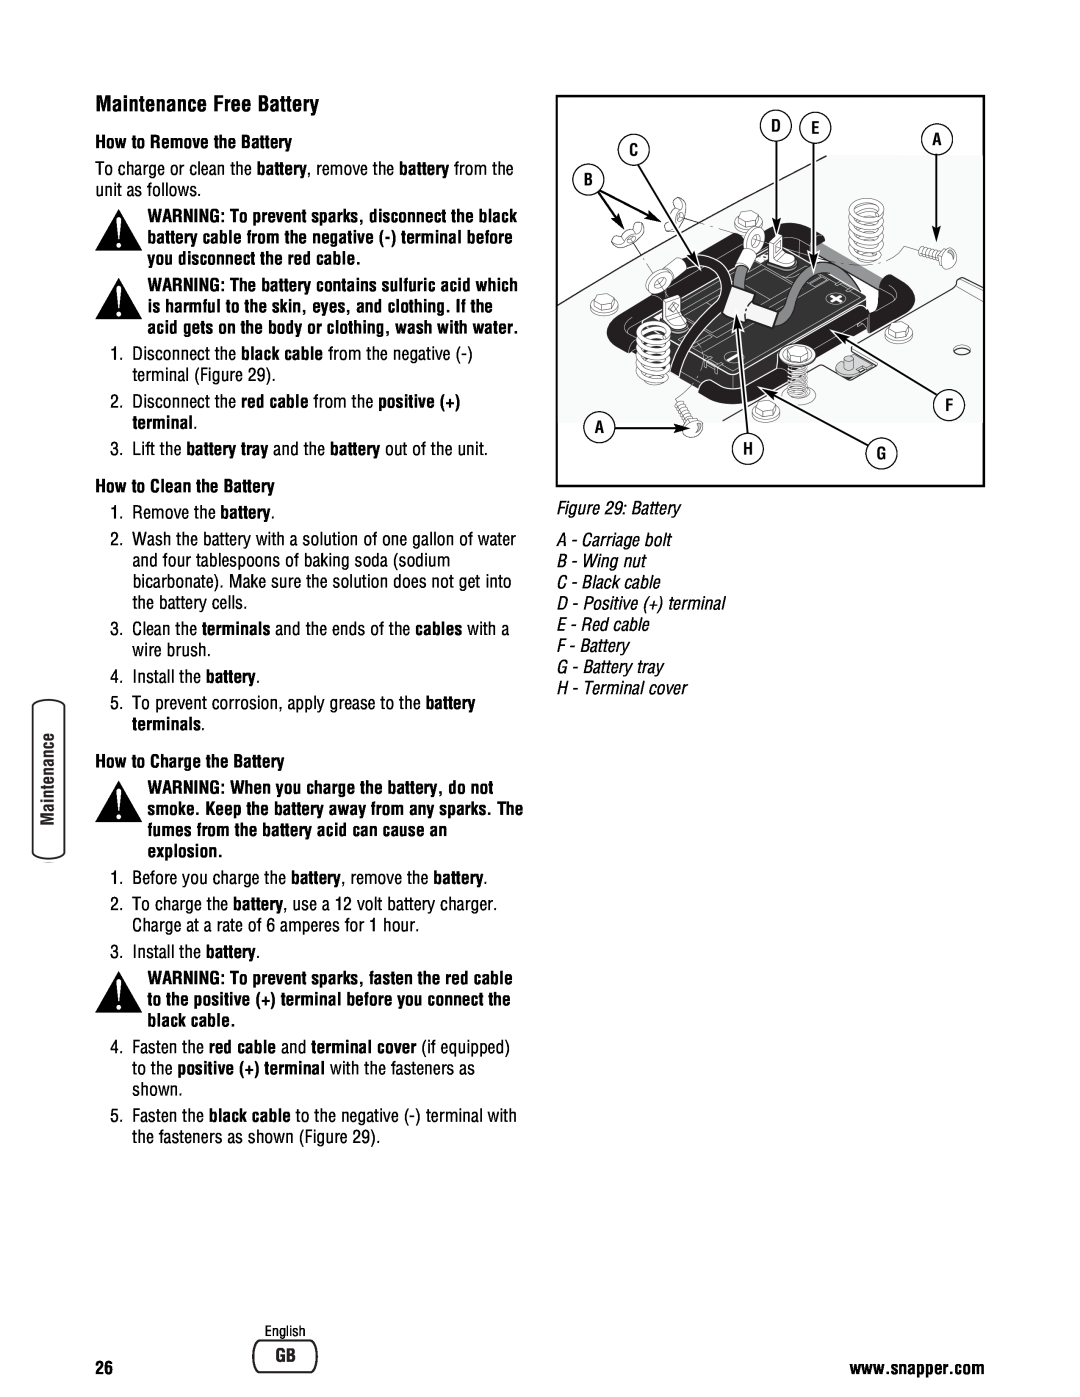 Snapper How to Remove the Battery, Battery A - Carriage bolt B - Wing nut, C - Black cable D - Positive + terminal 